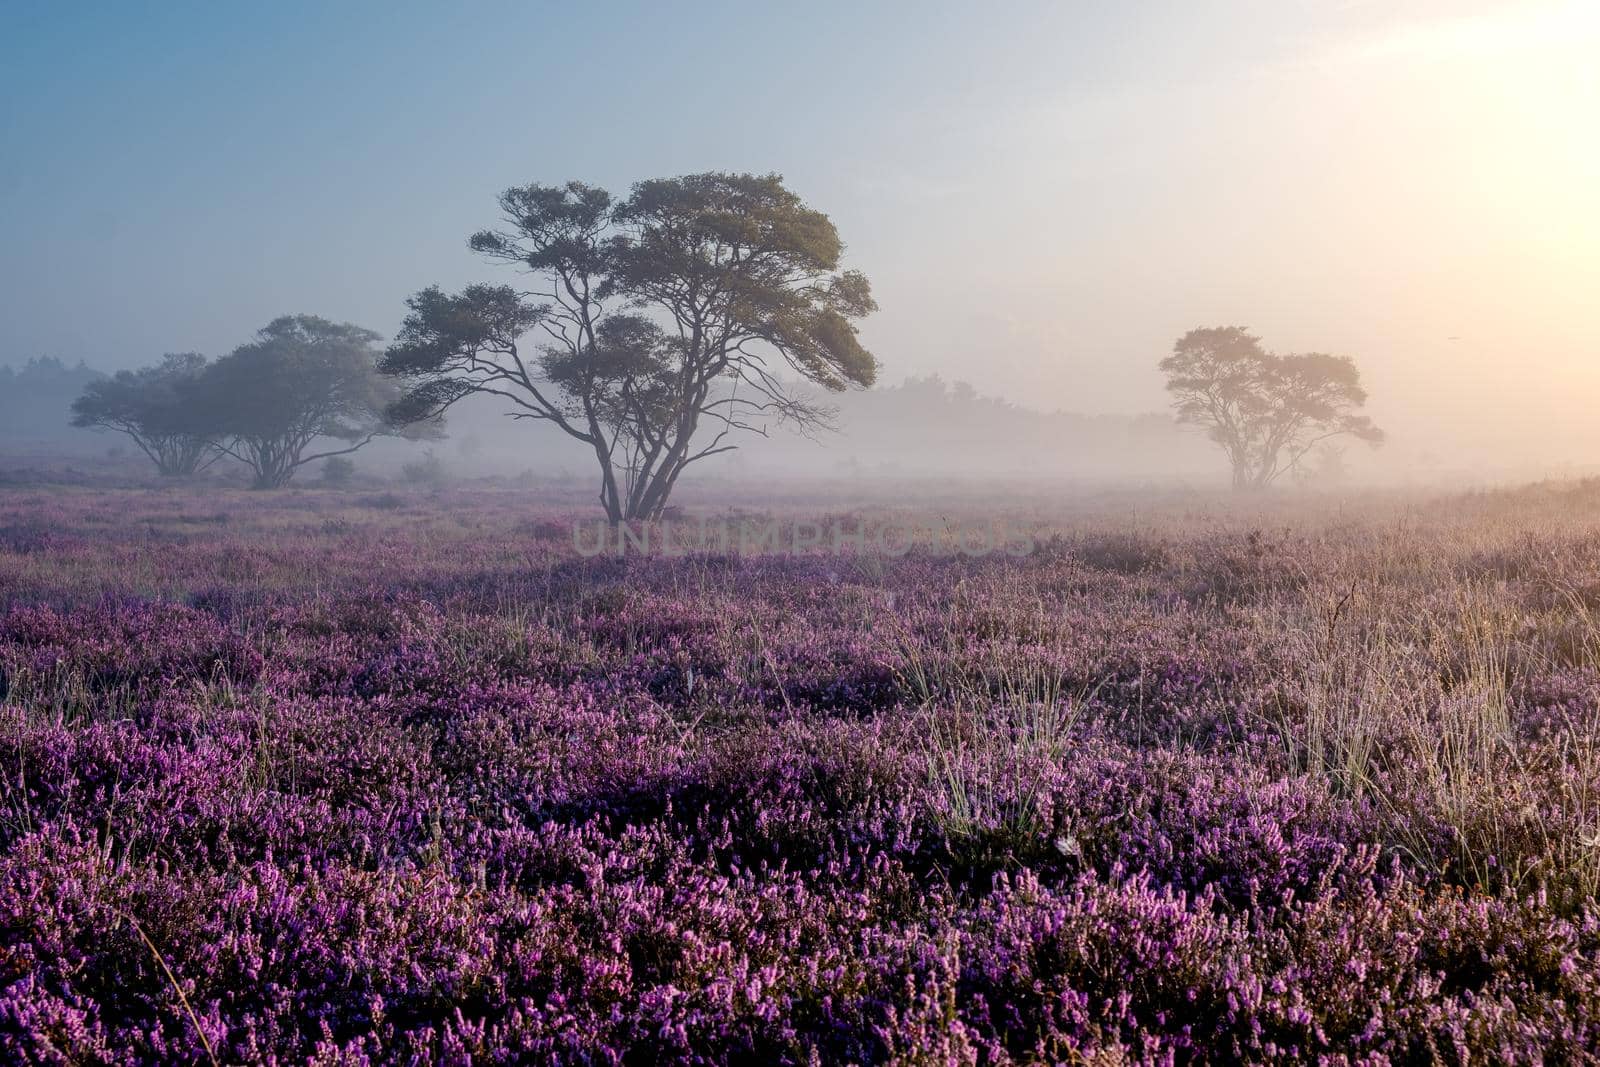 Blooming heather in the Netherlands,Sunny foggy Sunrise over the pink purple hills at Westerheid park Netherlands, blooming Heather fields in the Netherlands during Sunrise  by fokkebok